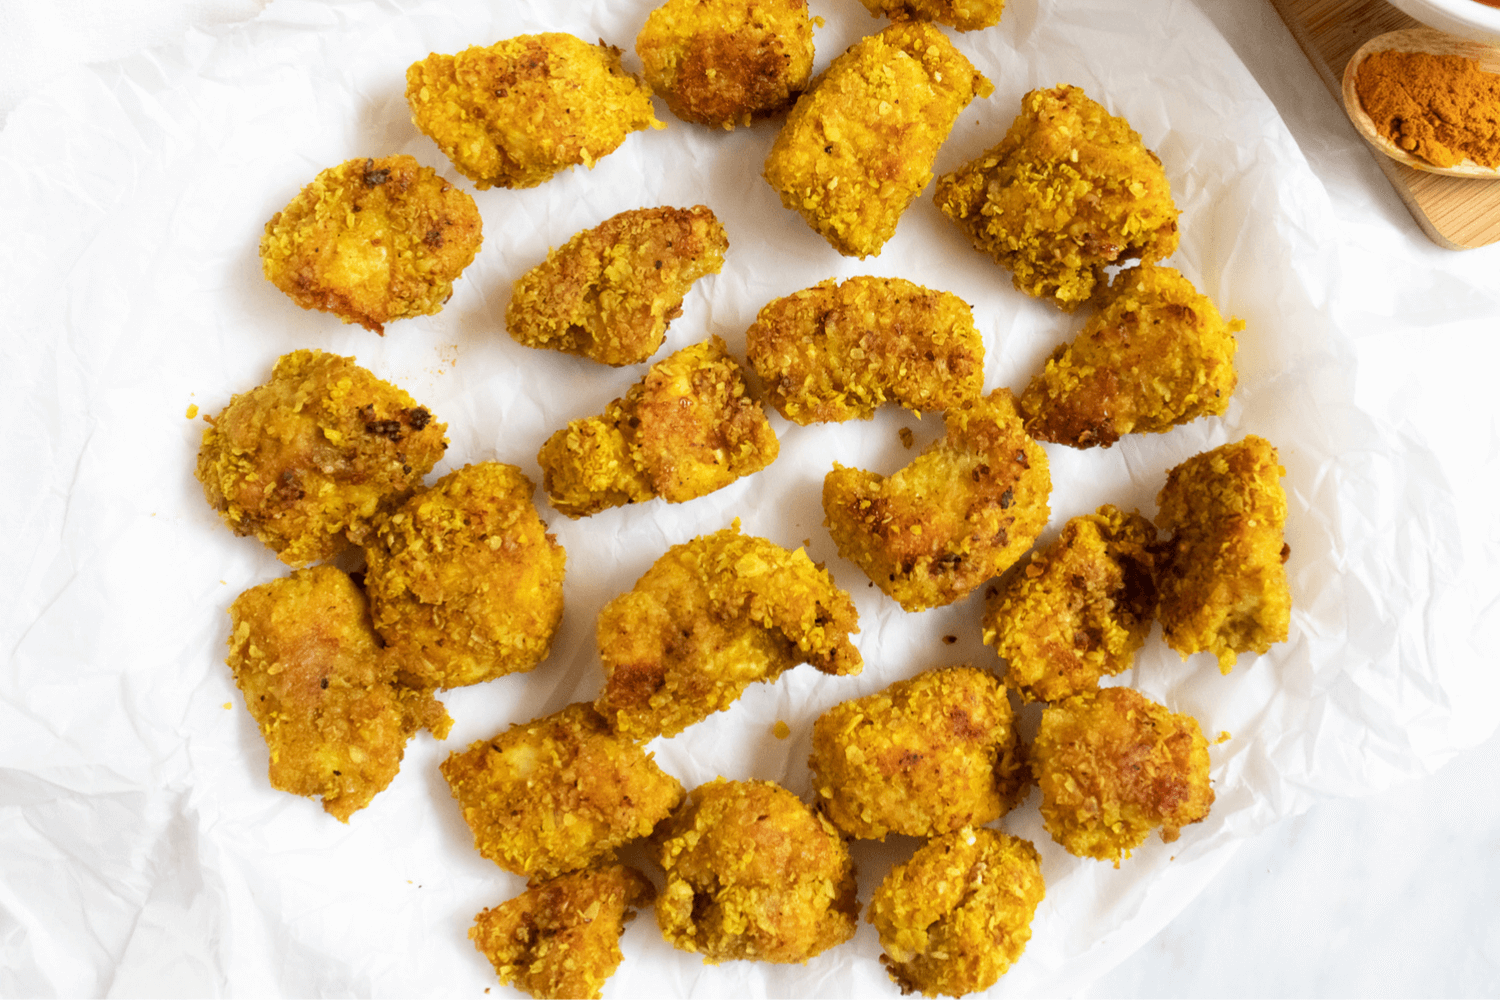 20 Family-Friendly Meals Your Clients Will Love: Turmeric Chicken Nuggets